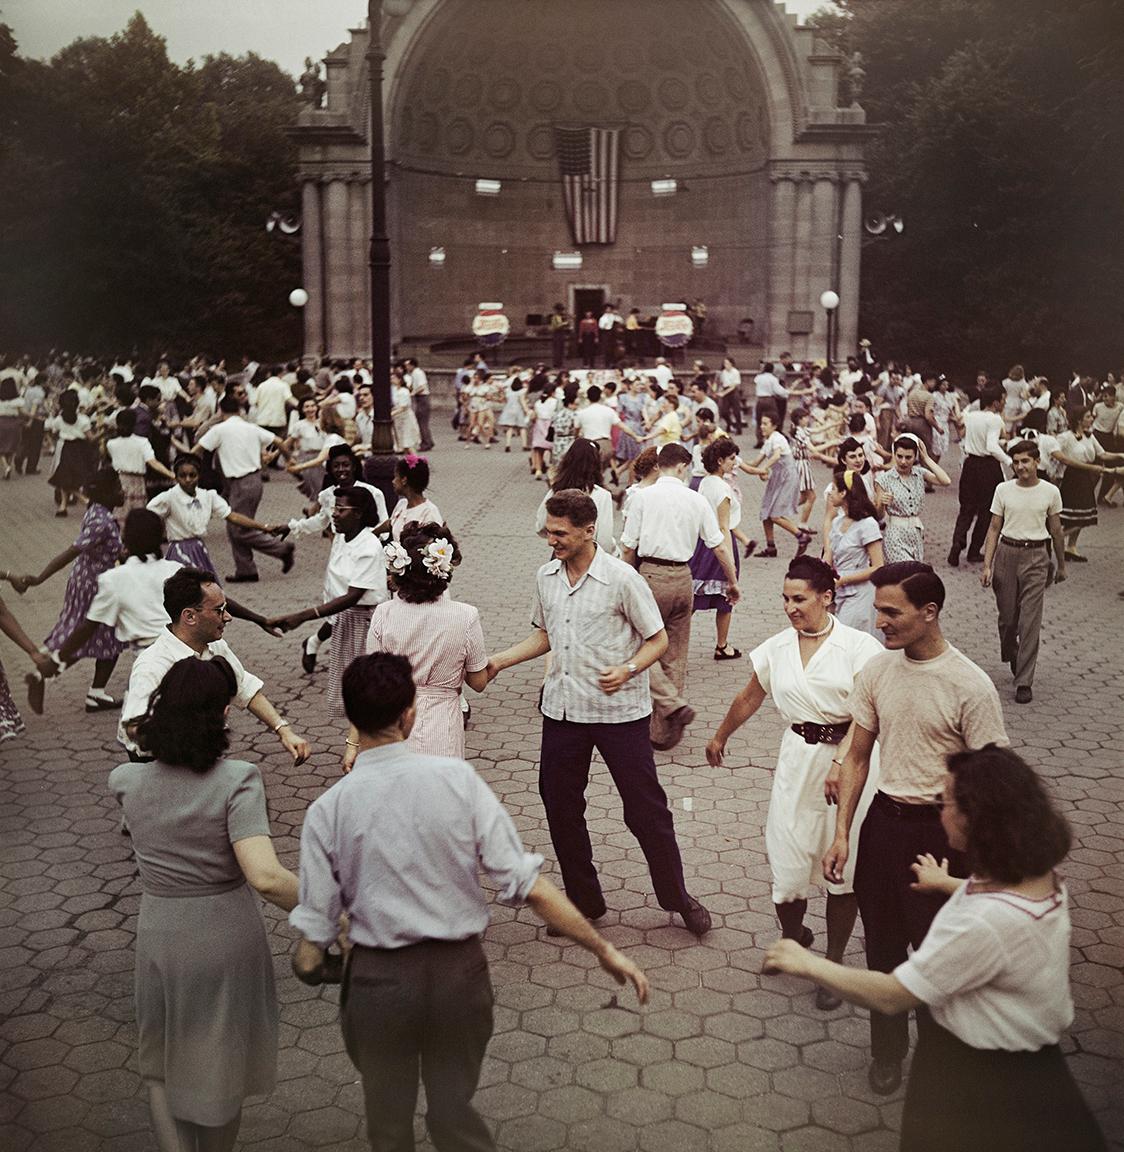 Slim Aarons Color Photograph - Naumburg Bandshell, Central Park